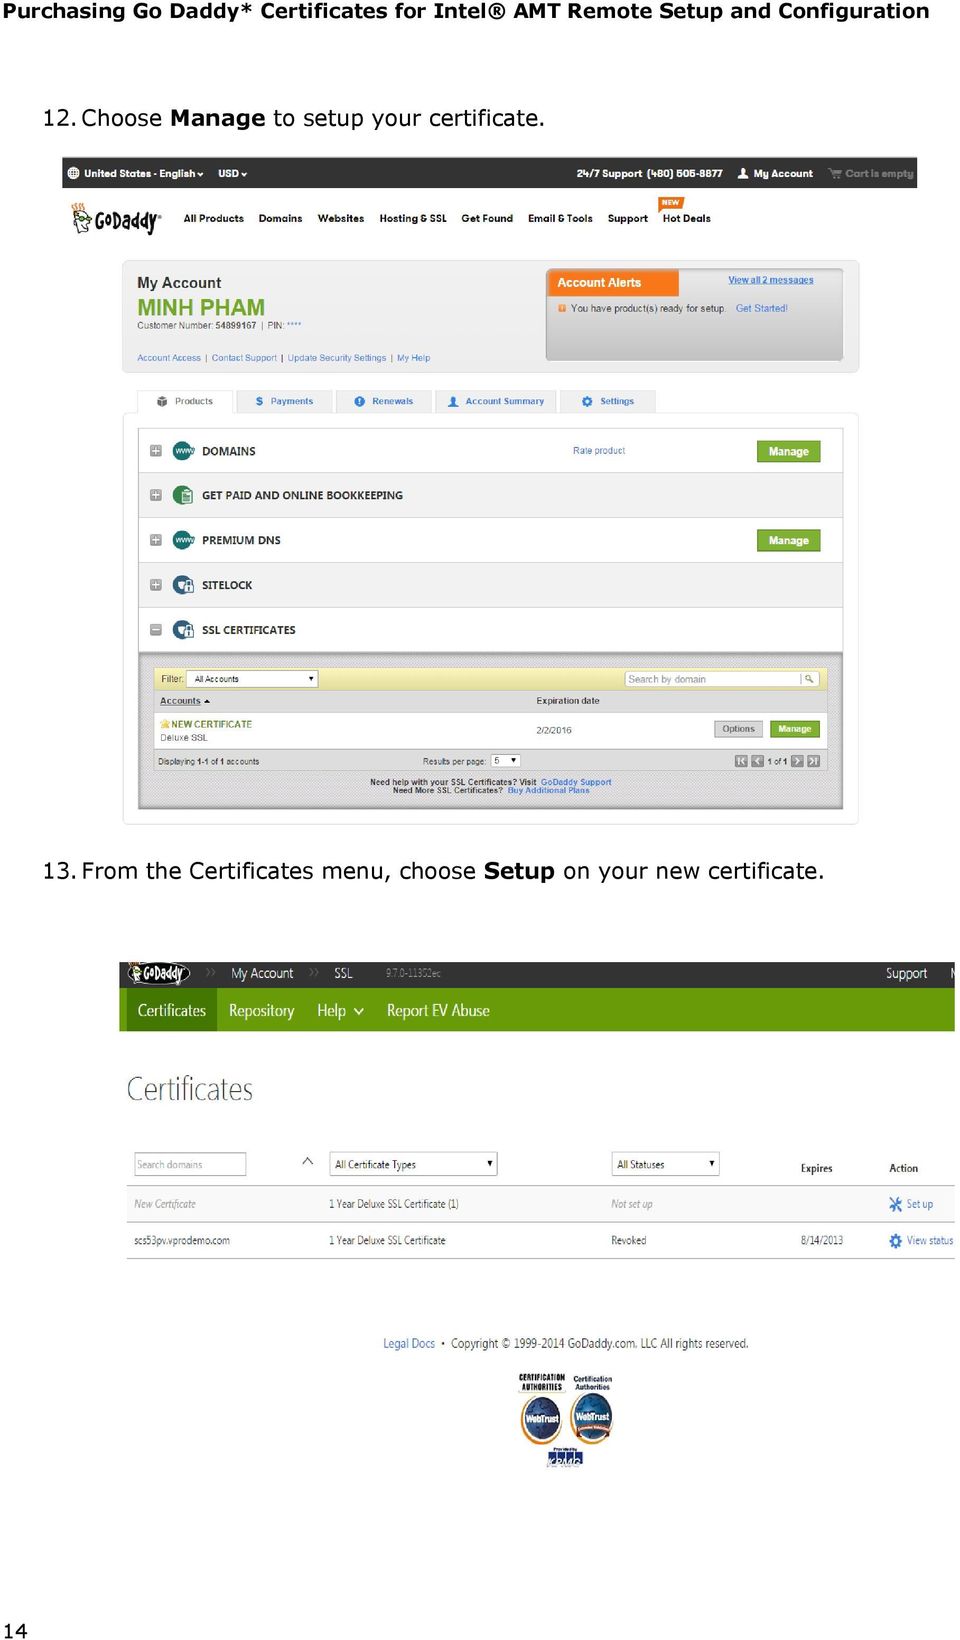 From the Certificates menu,